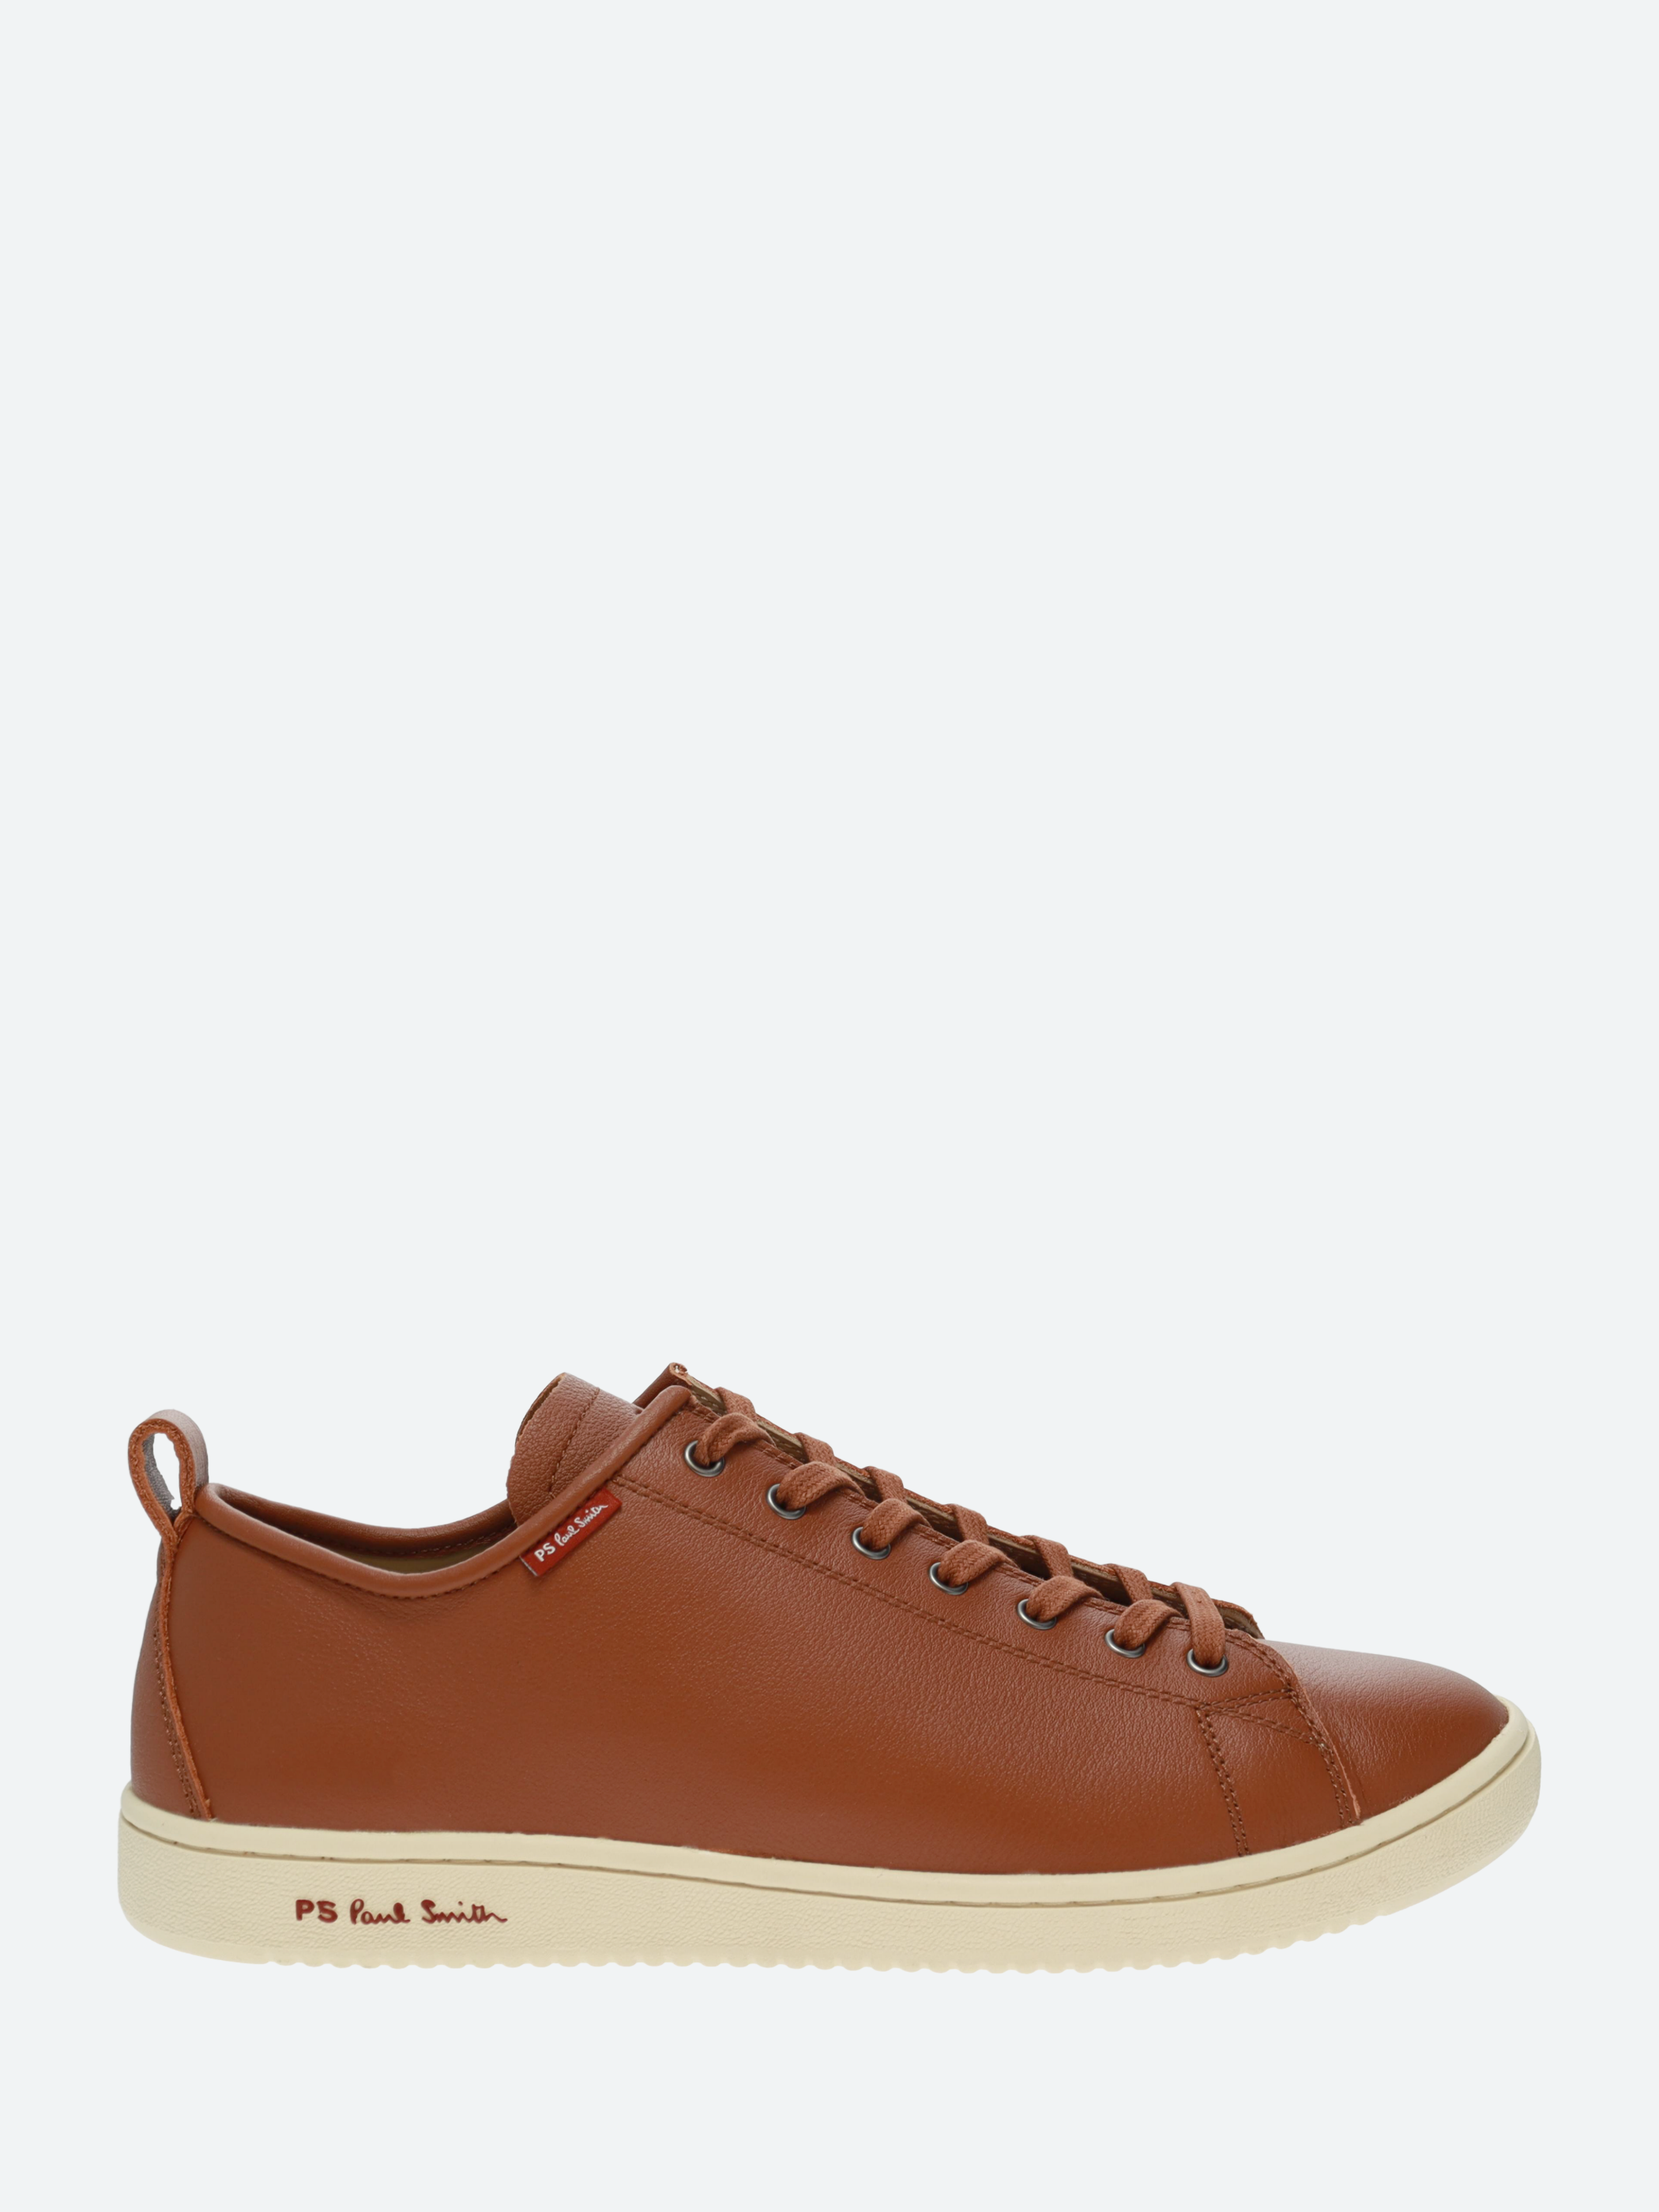 Paul Smith - Cleon Chukka Boots in Tan – gravitypope